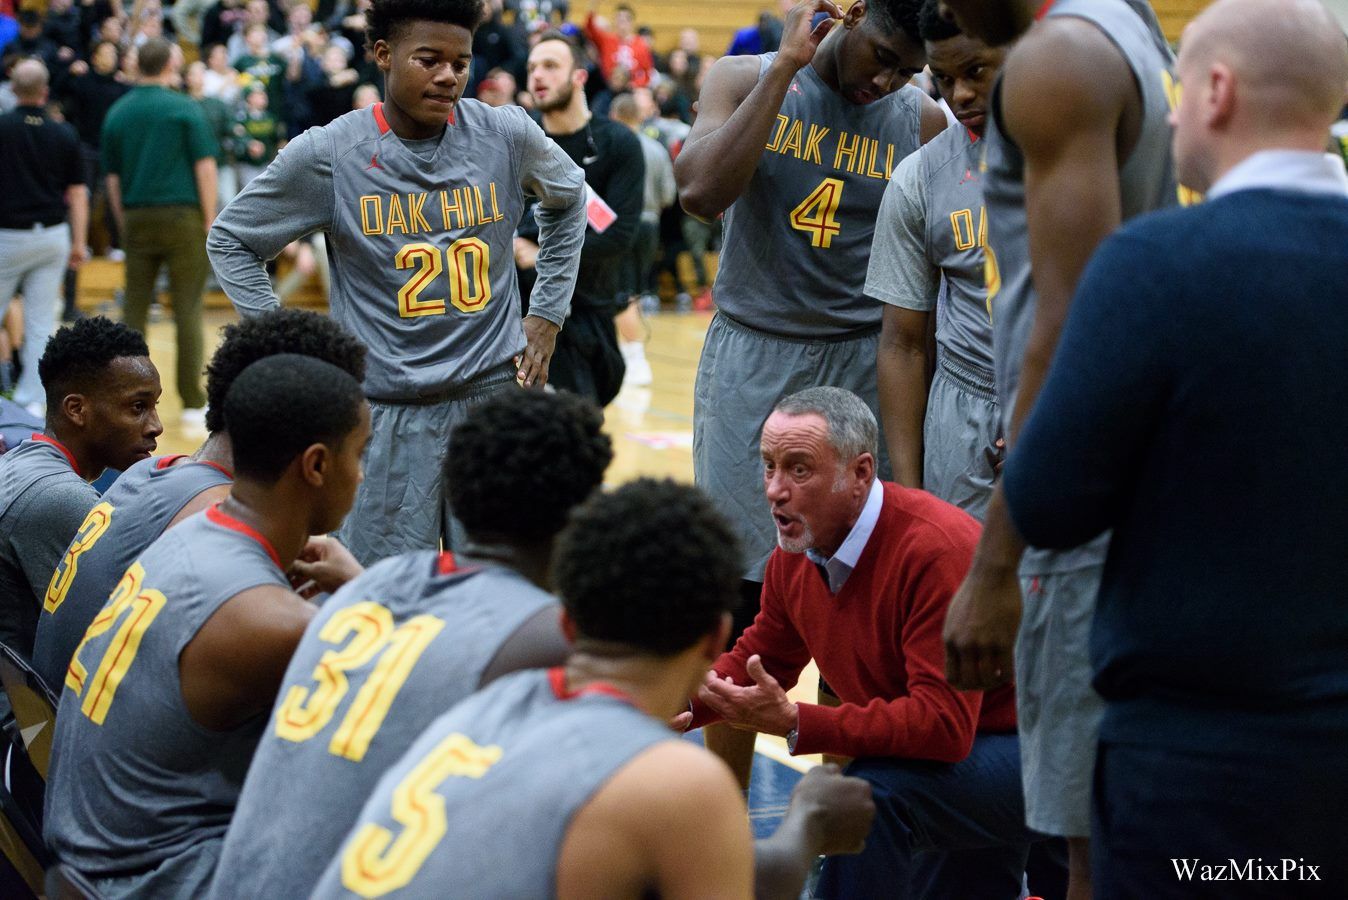 Steve Smith coaches Oak Hill during a timeout in 2015. His teams have won a tournament-record seven LSI titles.